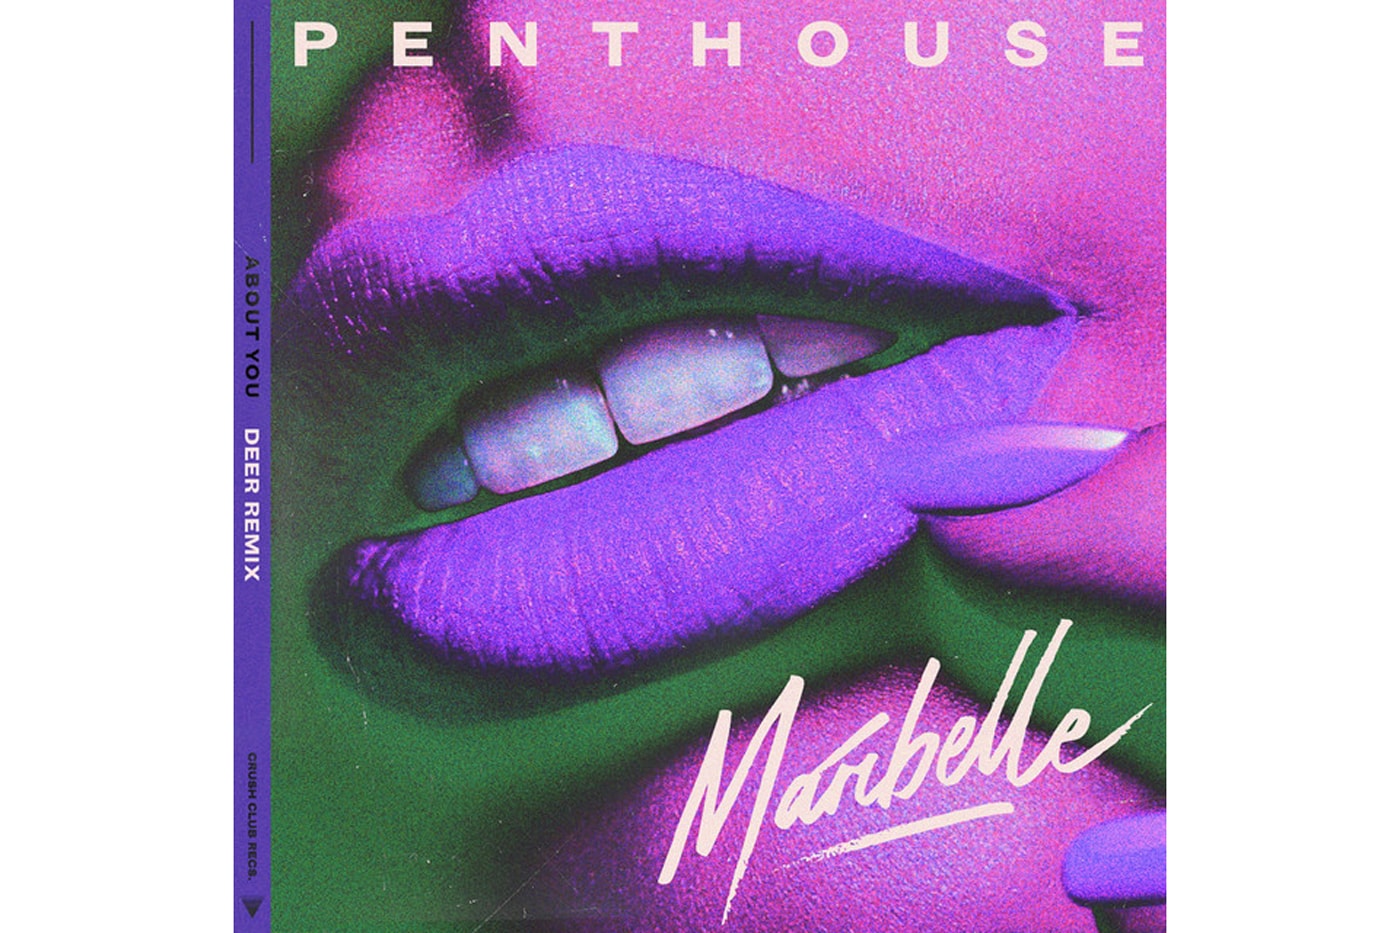 Penthouse Penthouse & Maribelle Share "About You"